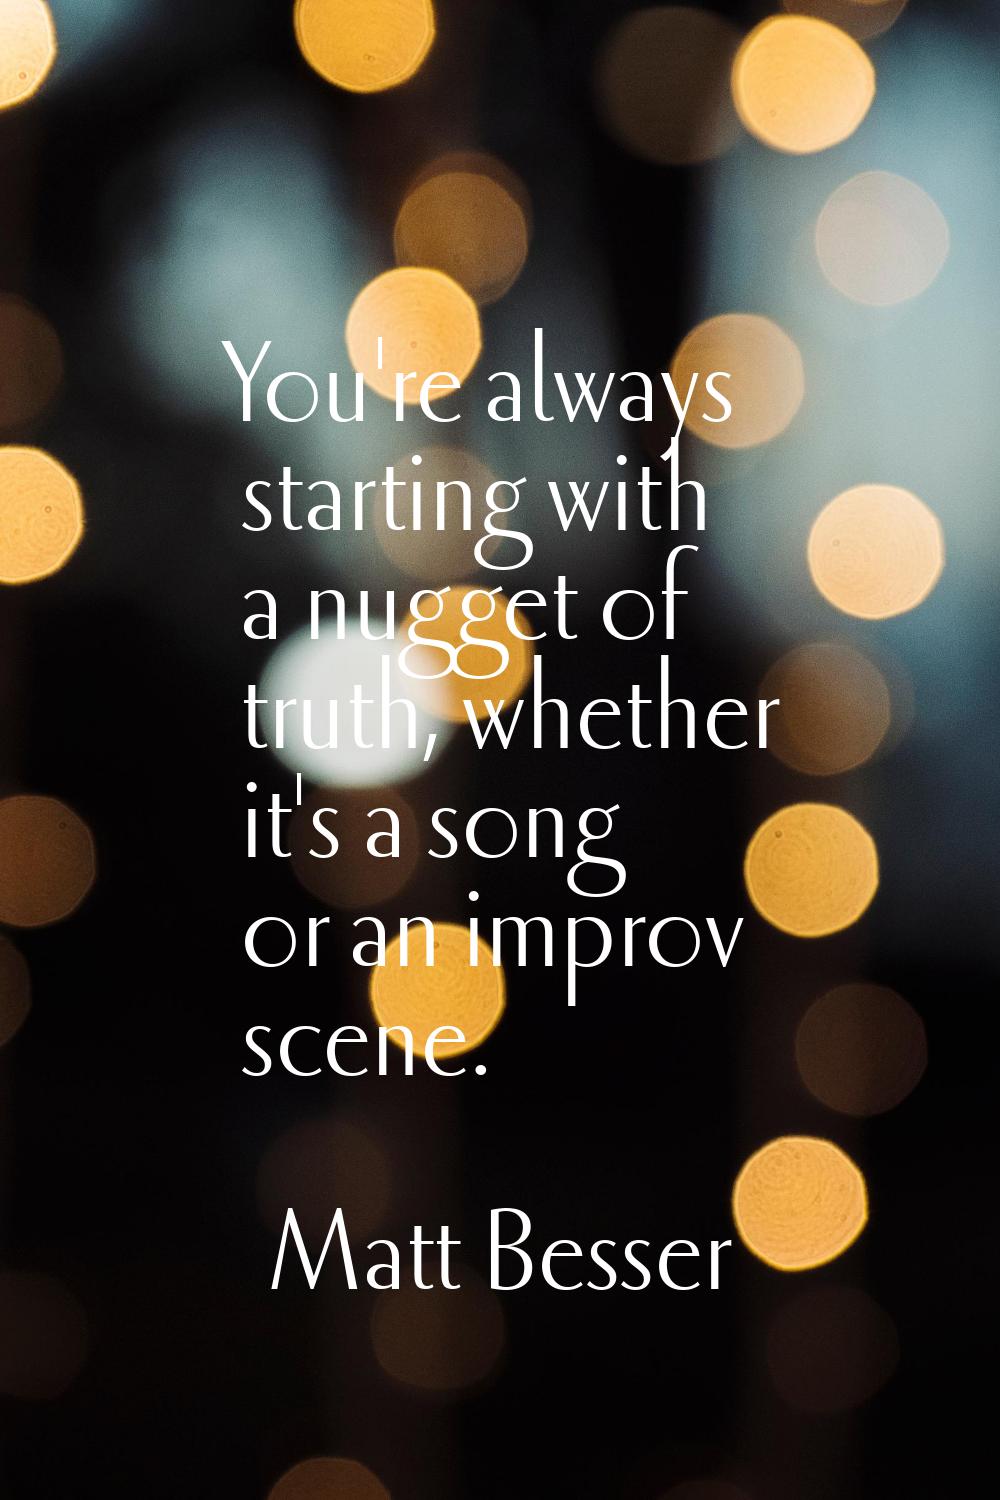 You're always starting with a nugget of truth, whether it's a song or an improv scene.